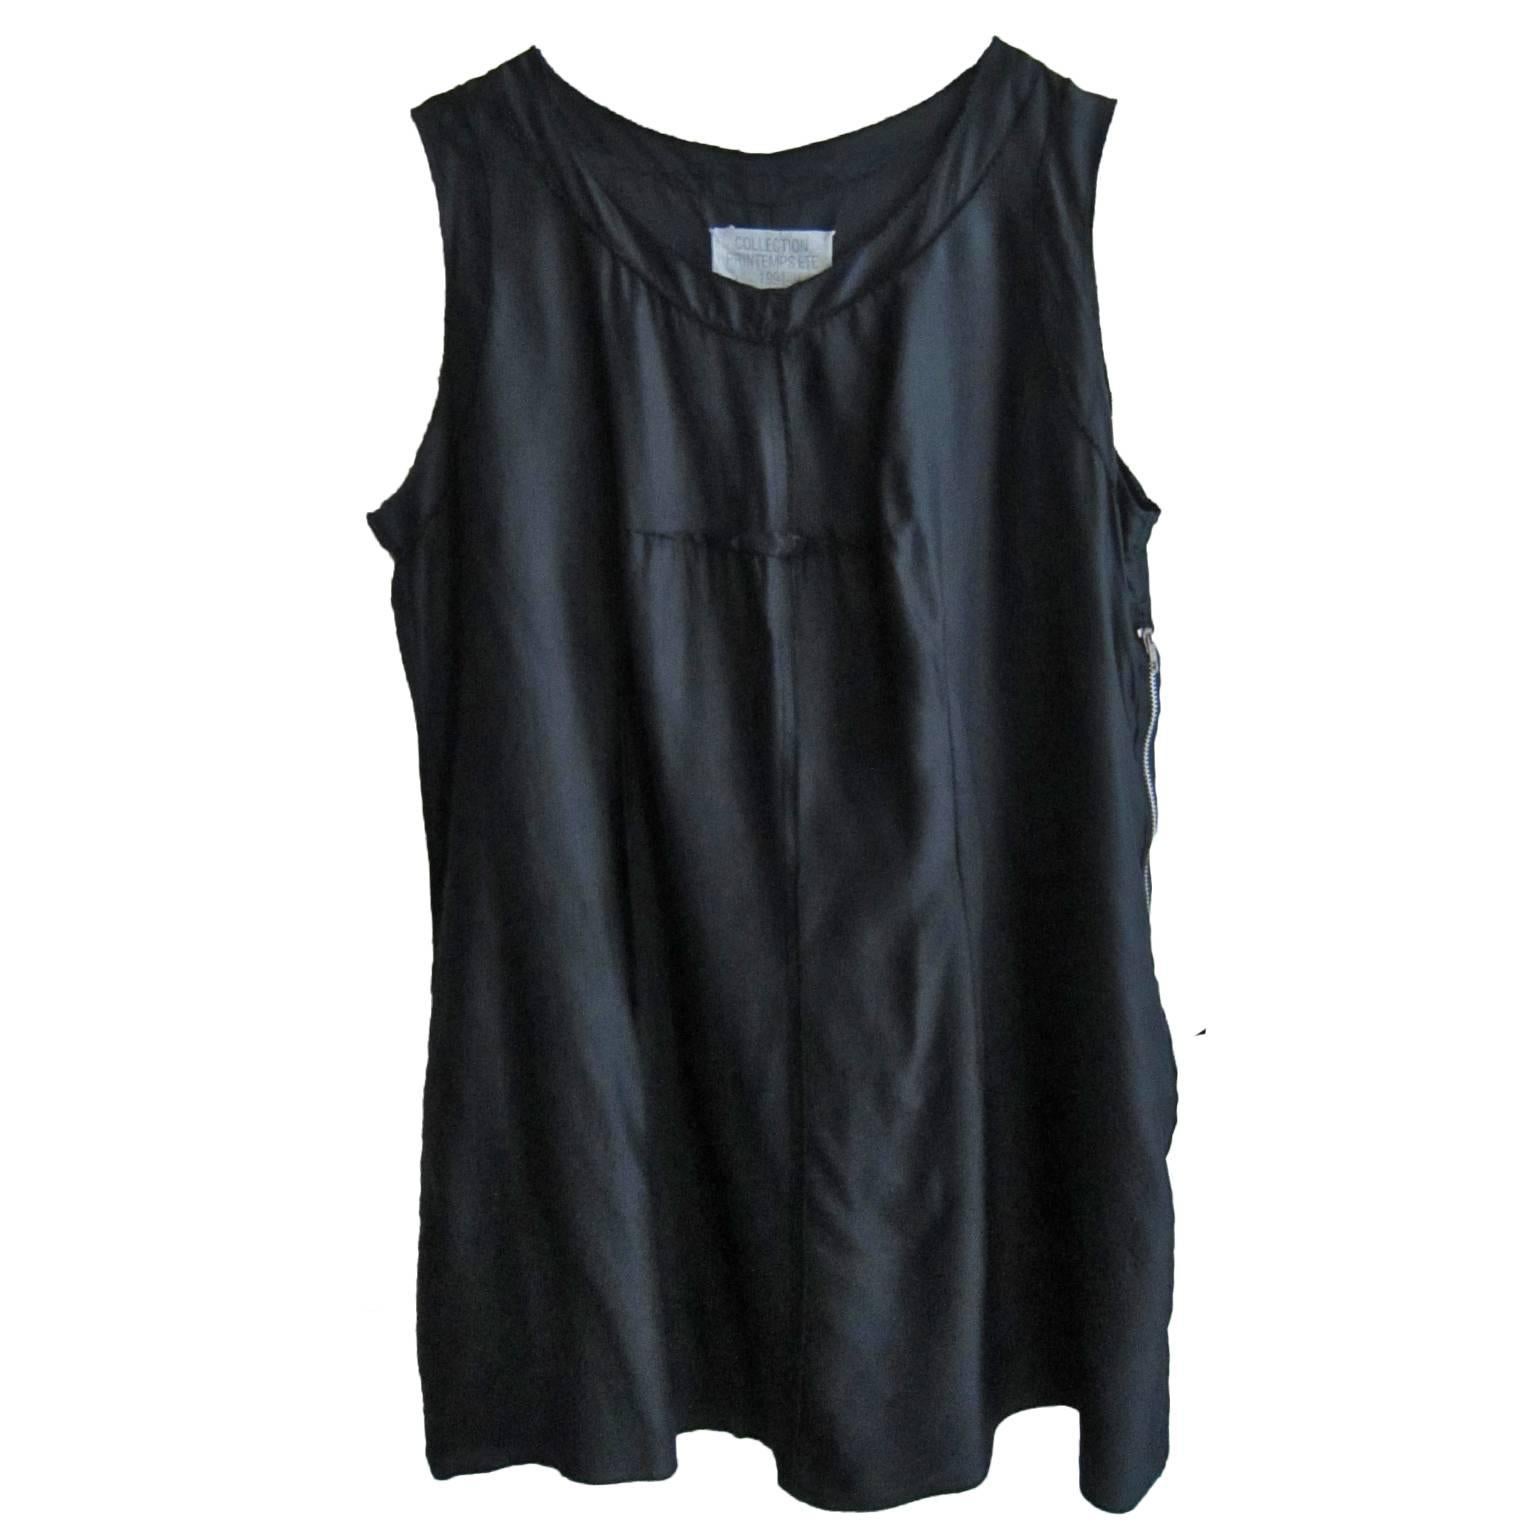 Martin Margiela Archive Tank Top SS 1991 / AW 1994 For Sale